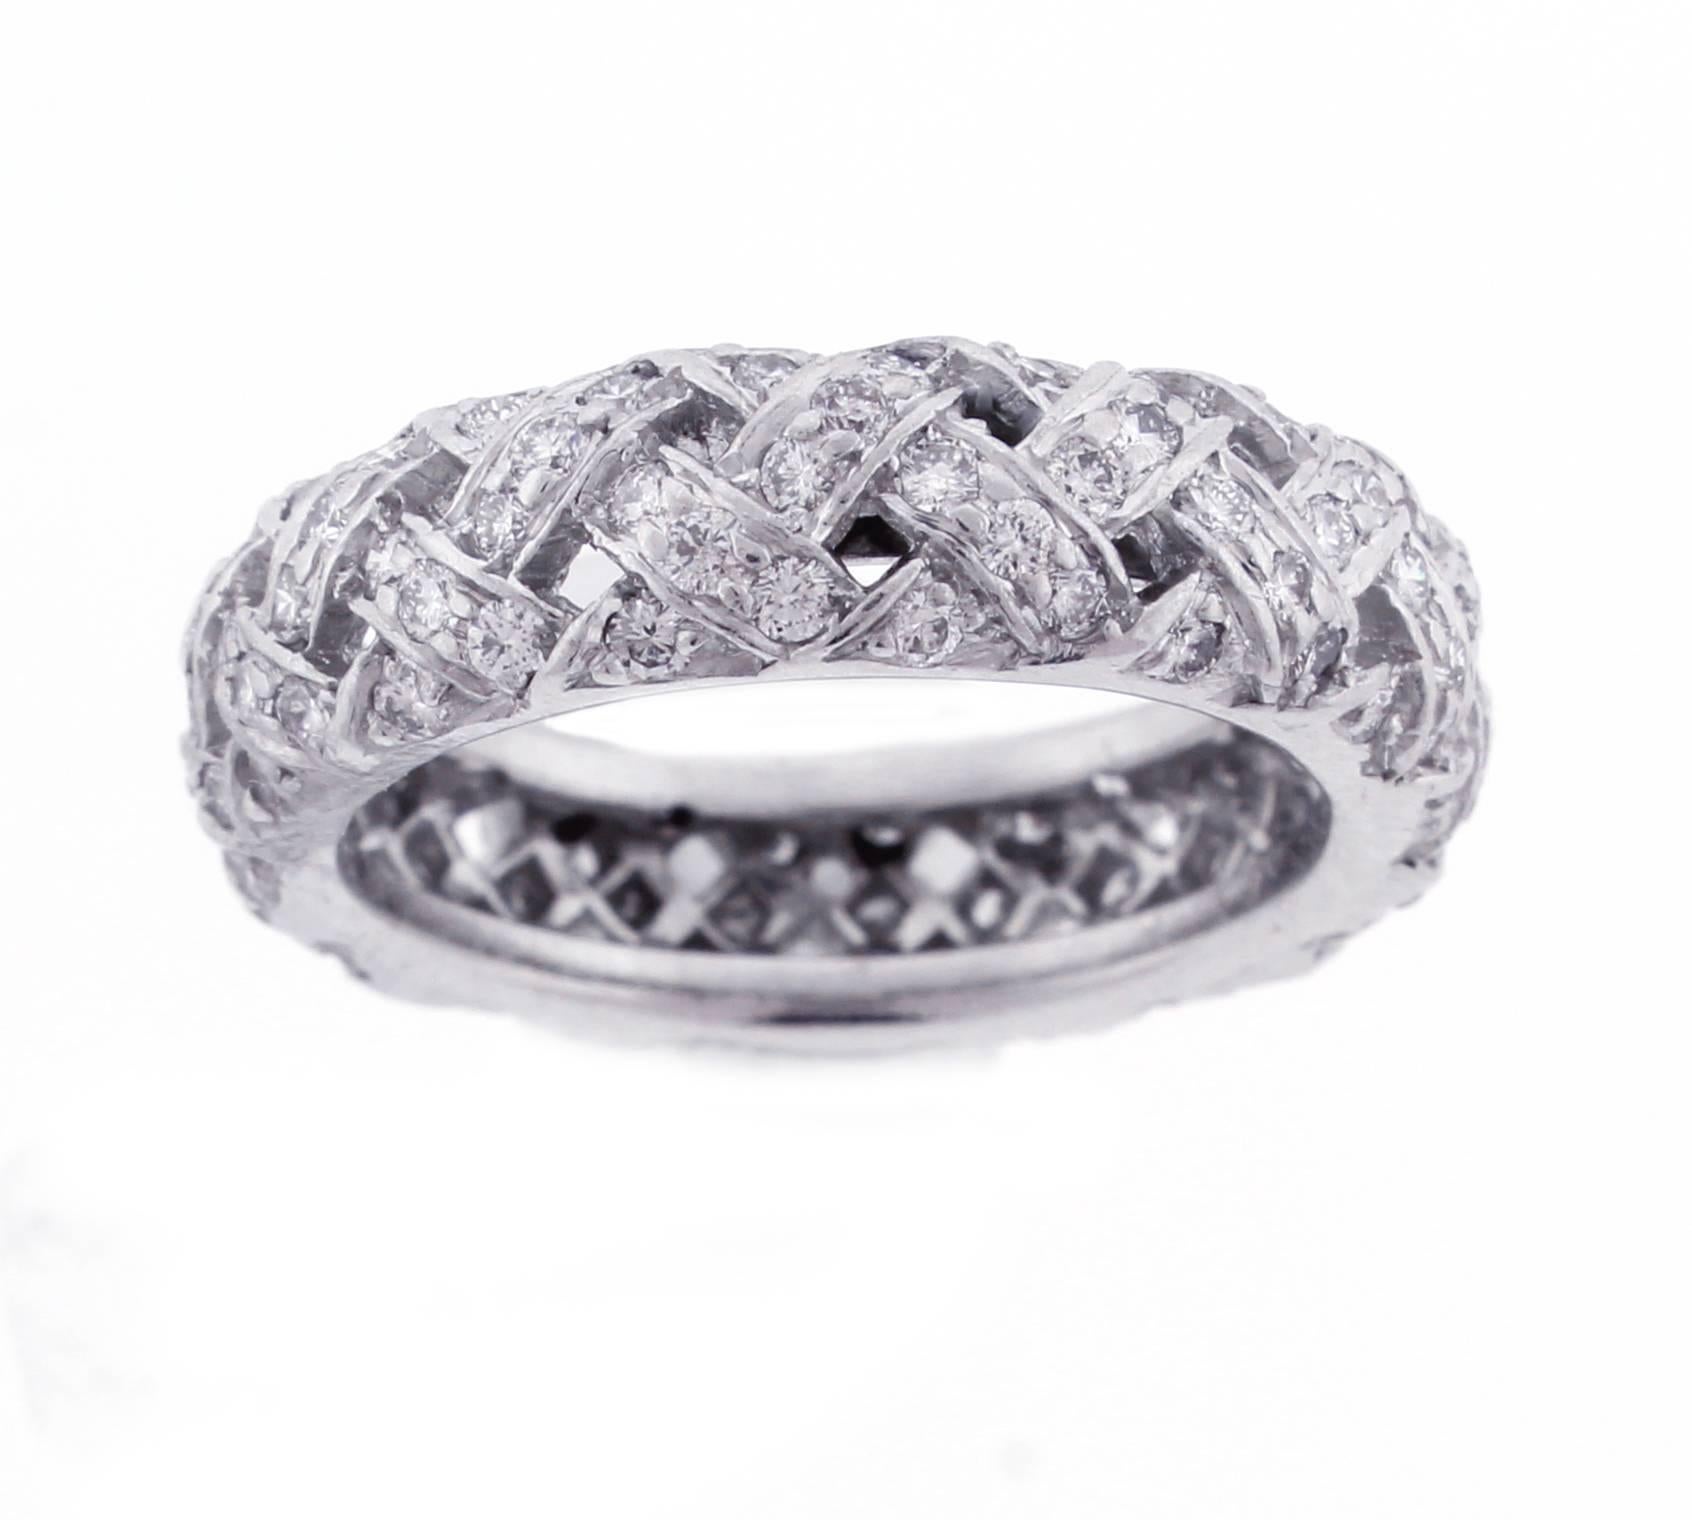 From the the Vannerie collection by Tiffany & Co., a  basket weave platinum diamond band ring. The ring is comprised of 115 brilliant diamonds weighing approximately 1.10 carats. 5.5 mm wide , size 5